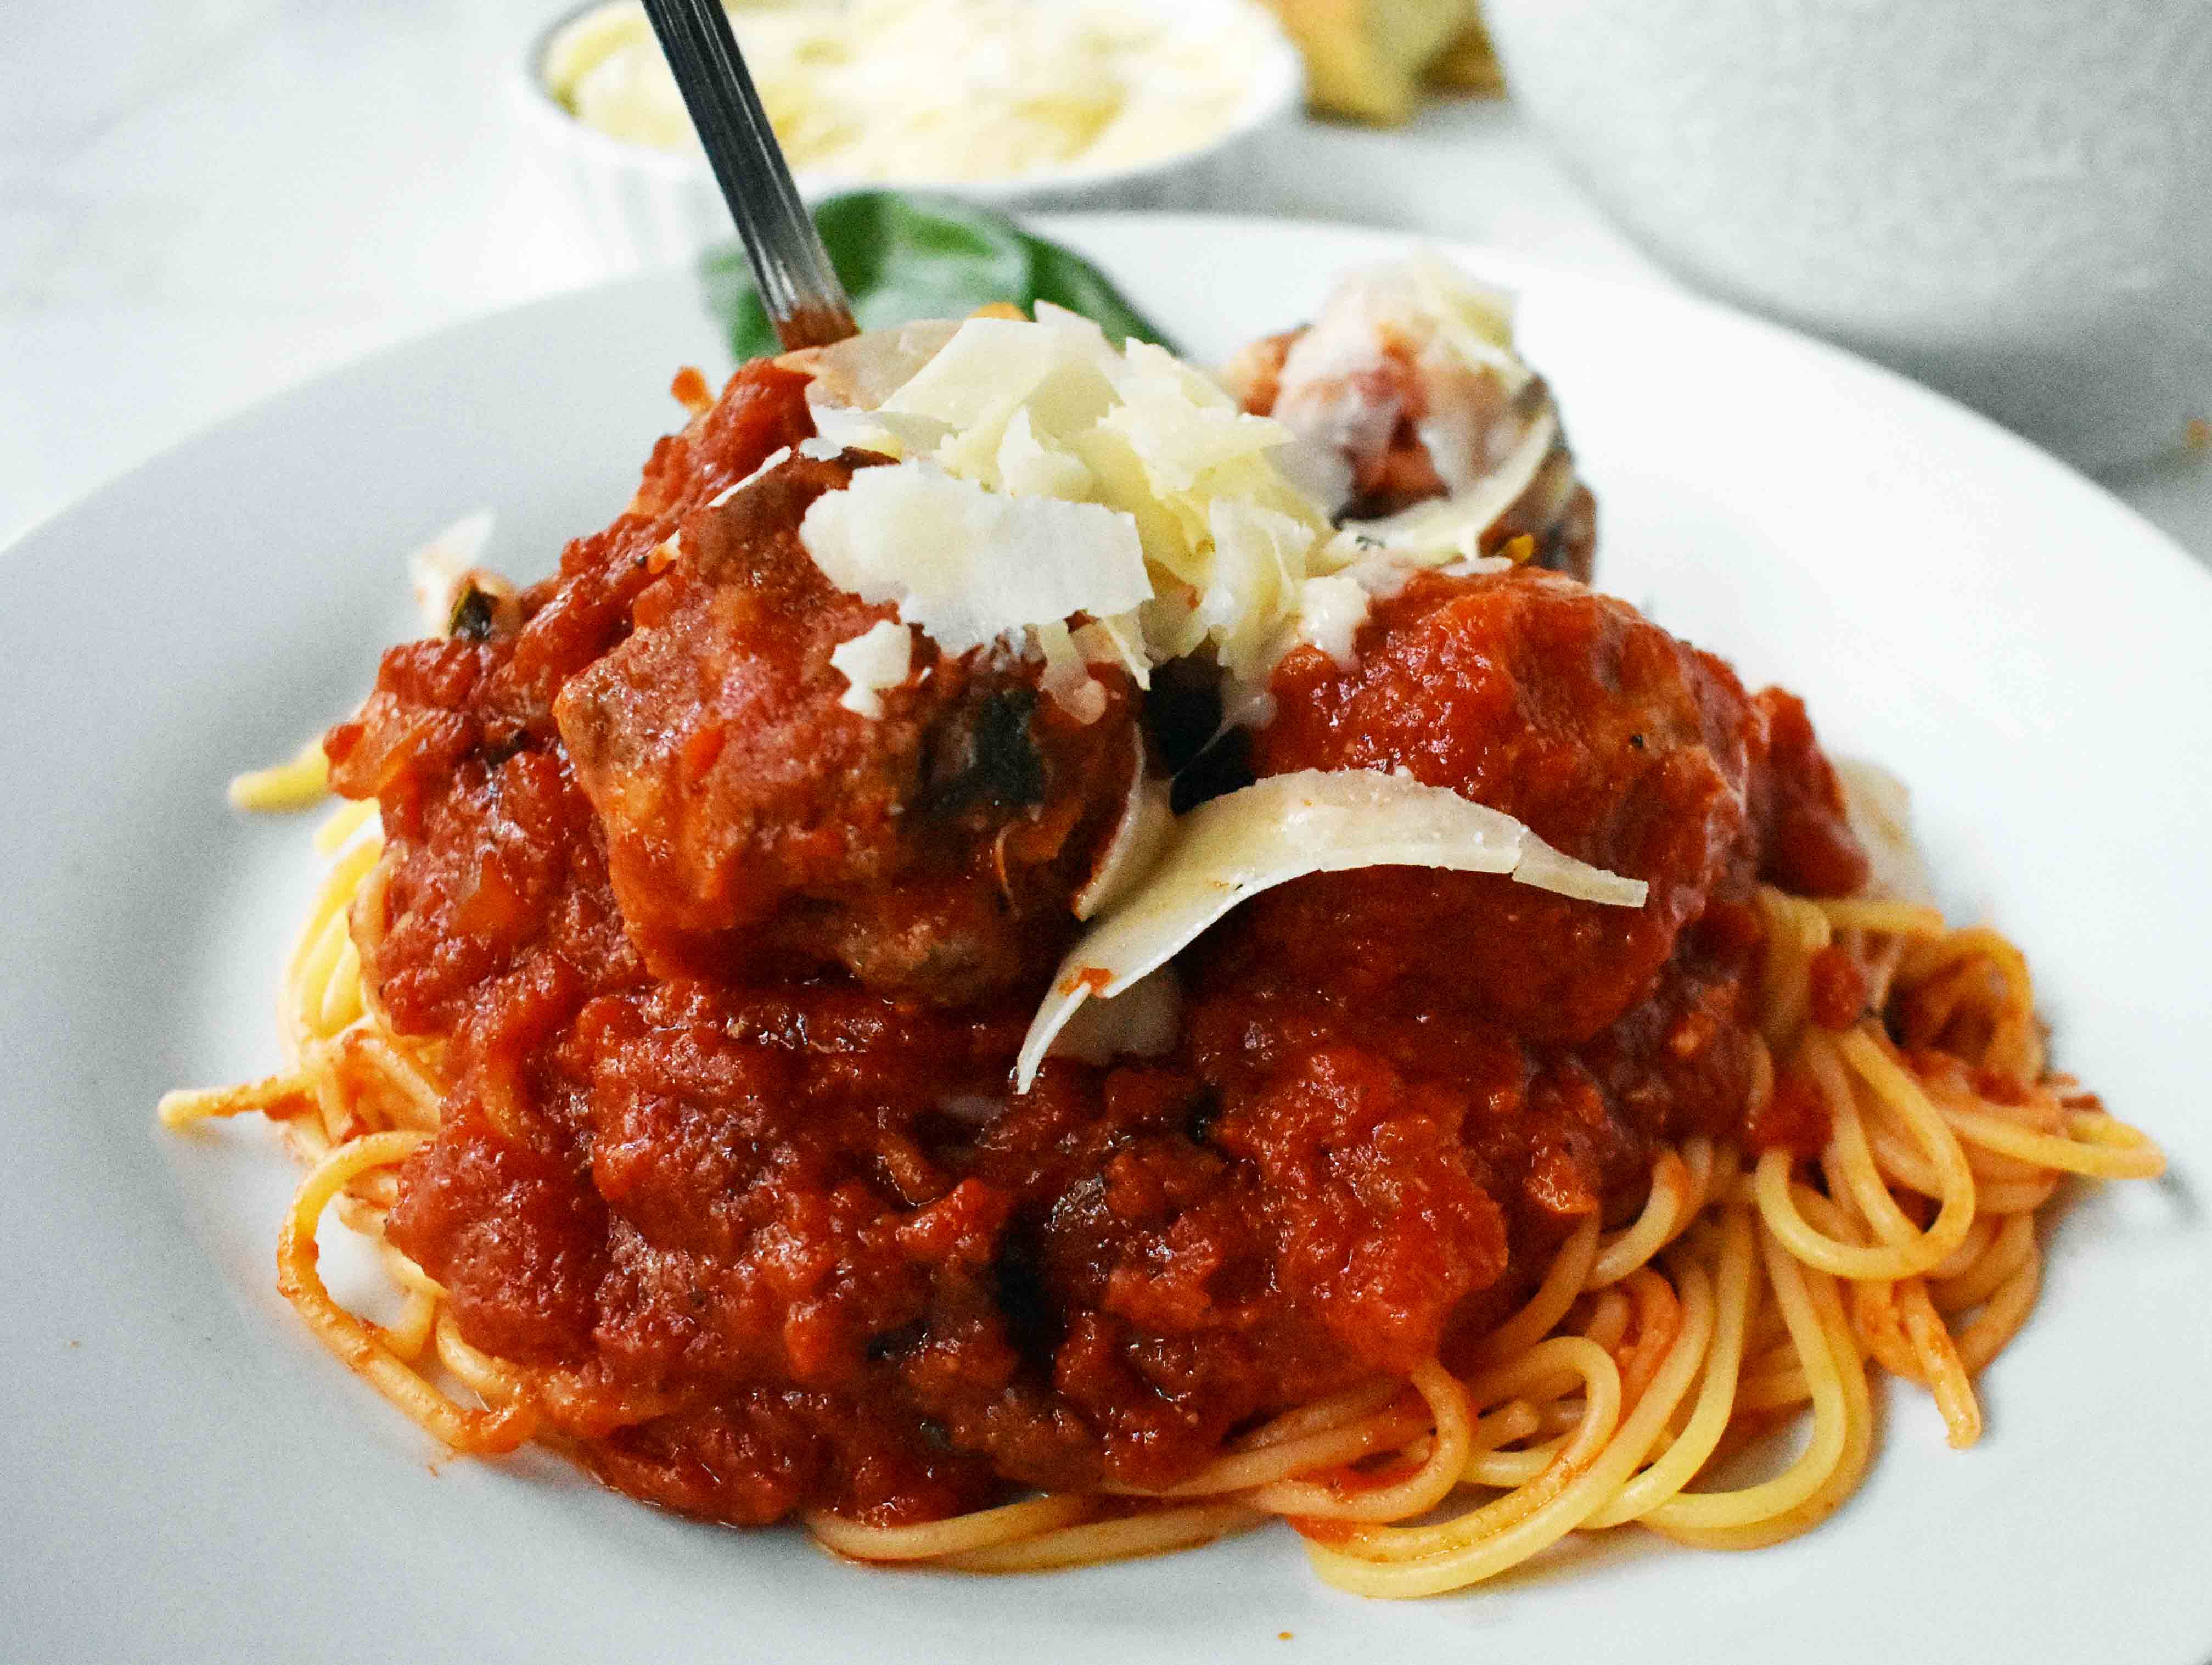 Mama's Best Ever Spaghetti and Meatballs by Modern Honey. Homemade meatballs made from scratch. Authentic Italian meatballs and marinara sauce.